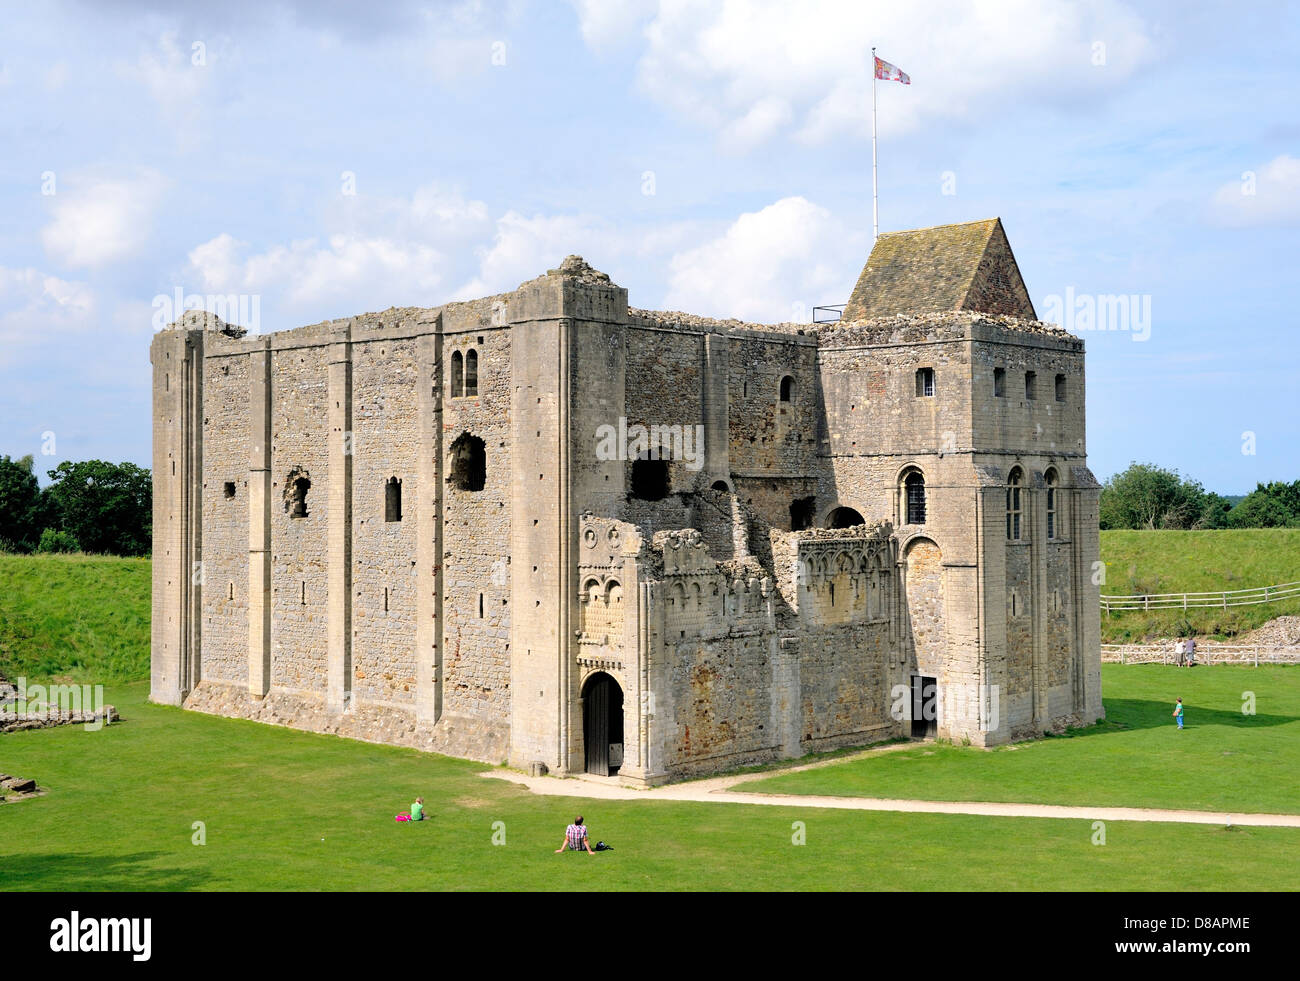 Castle Rising mediaeval Norman castle, Norfolk, England, dates from 1140 AD. Stone keep and inner bailey Stock Photo